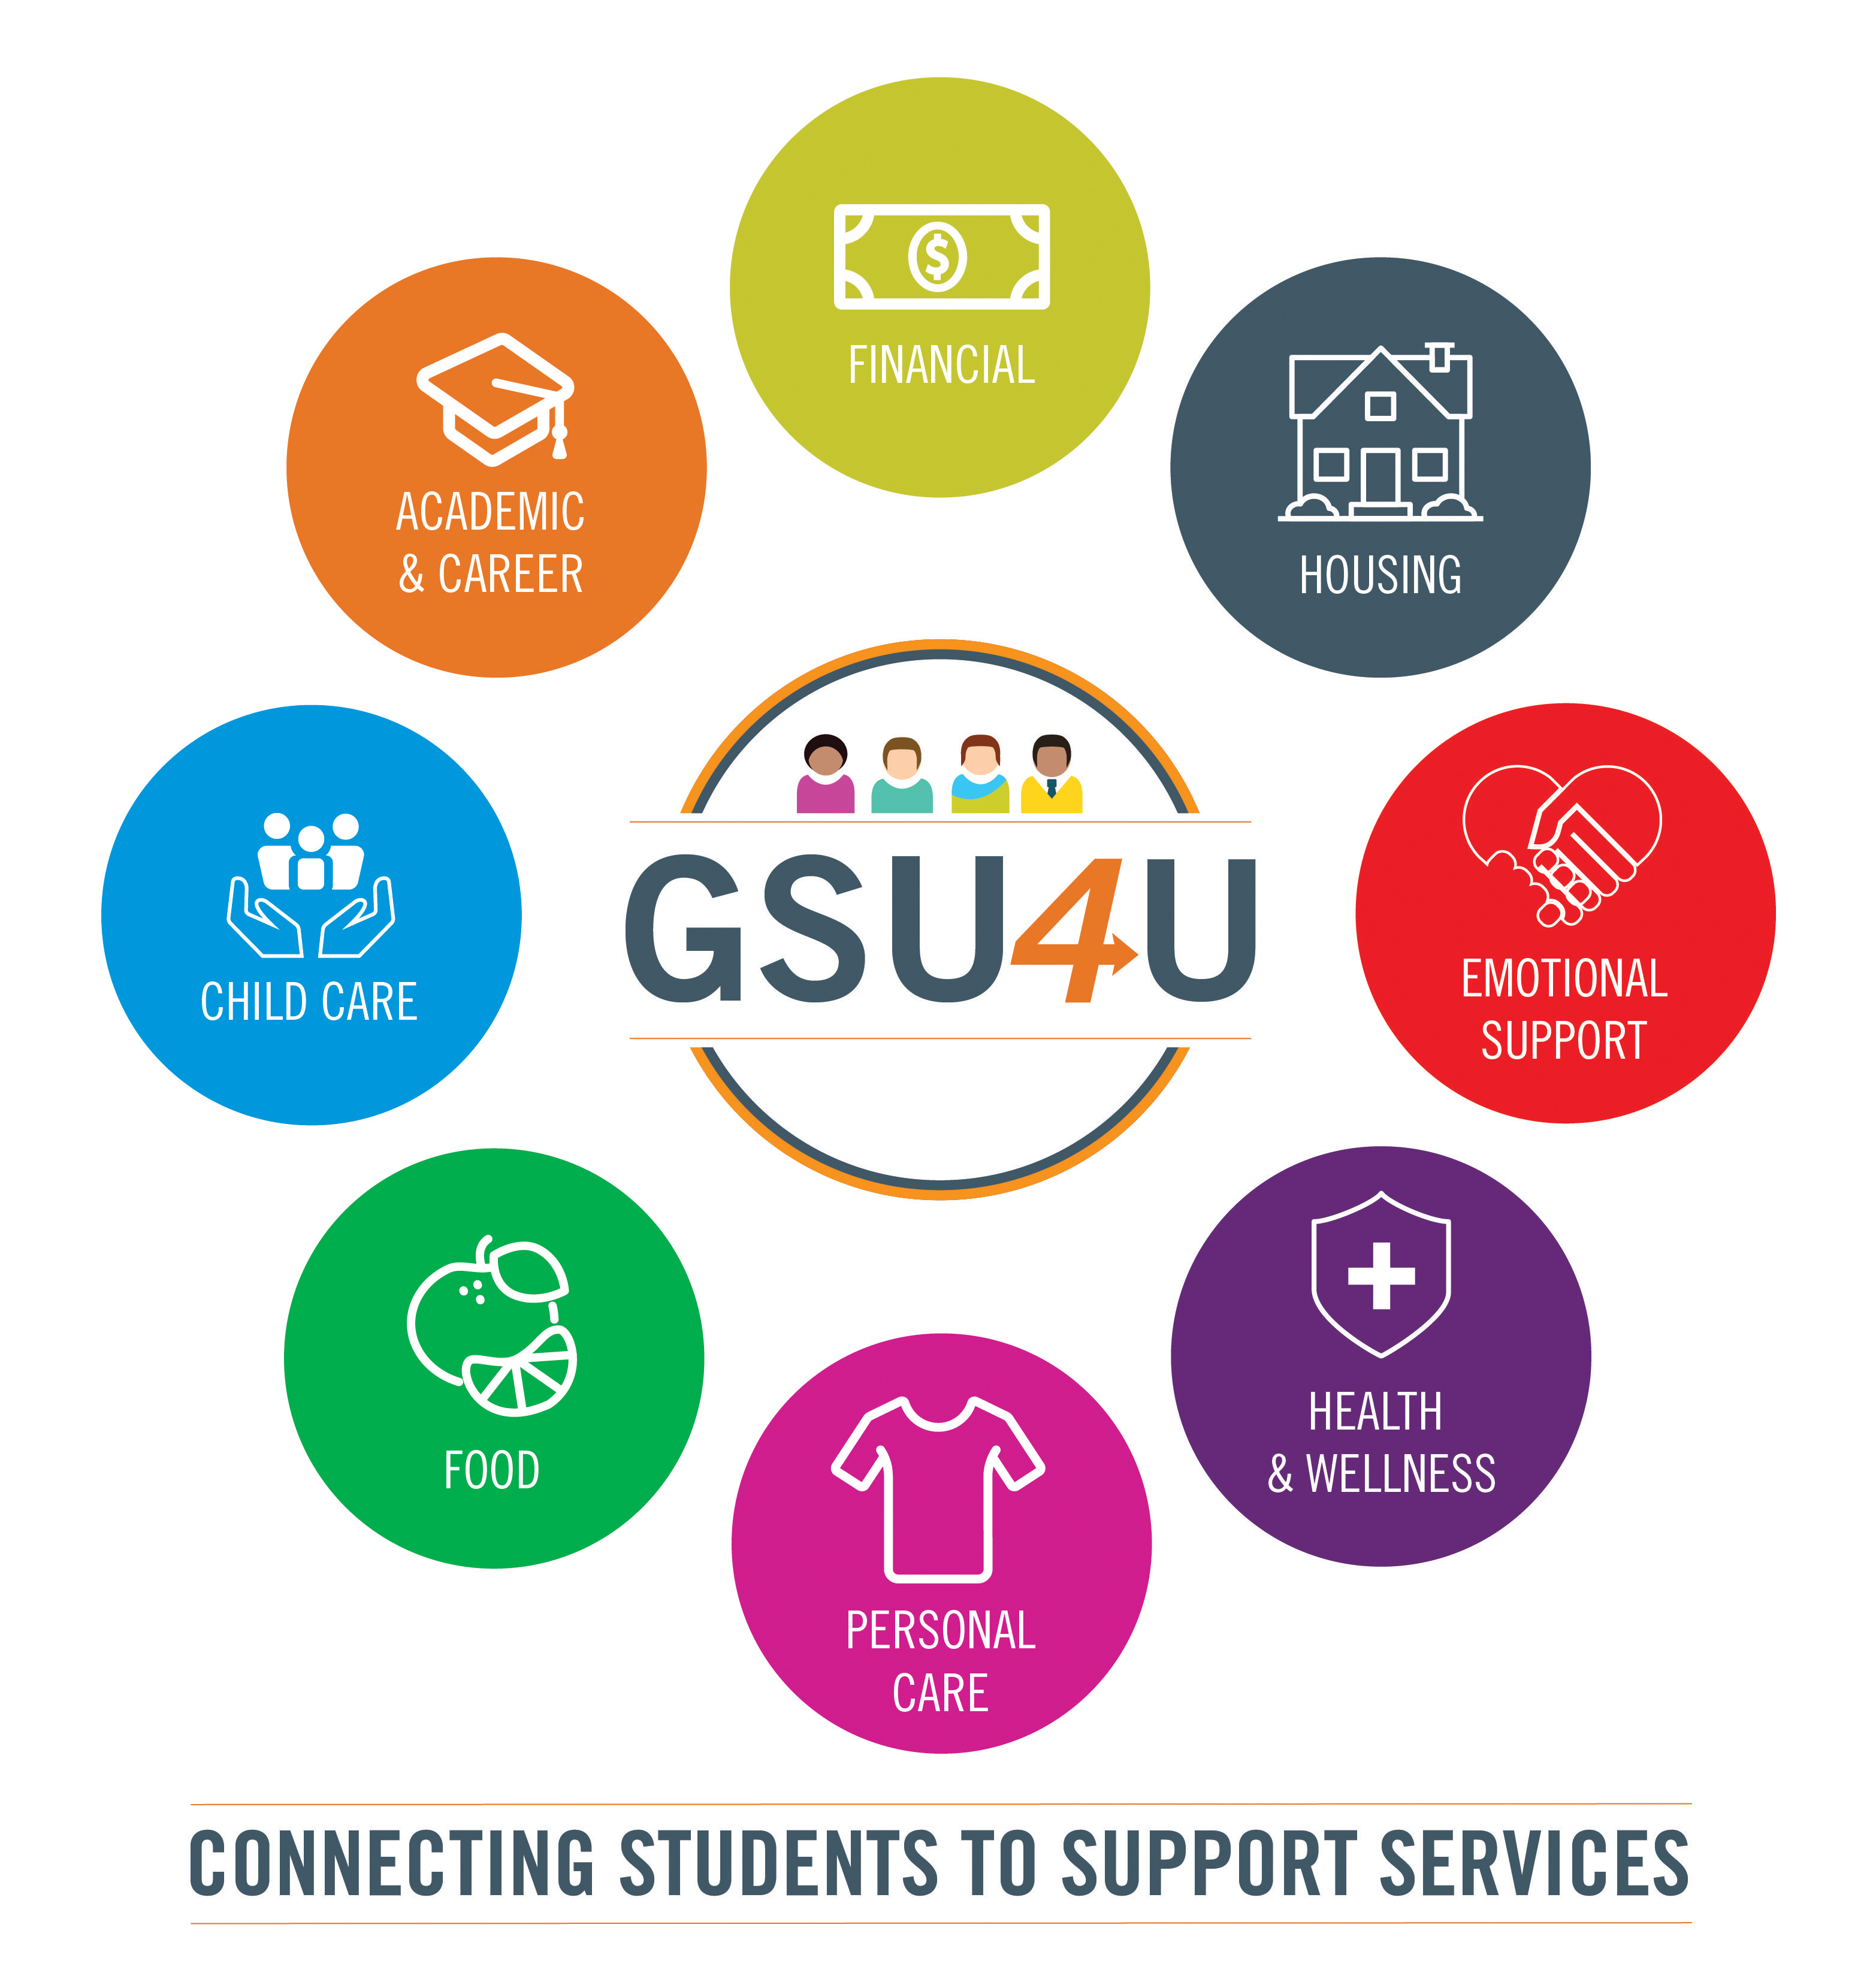 GSU4U - Connecting Students to Support Services